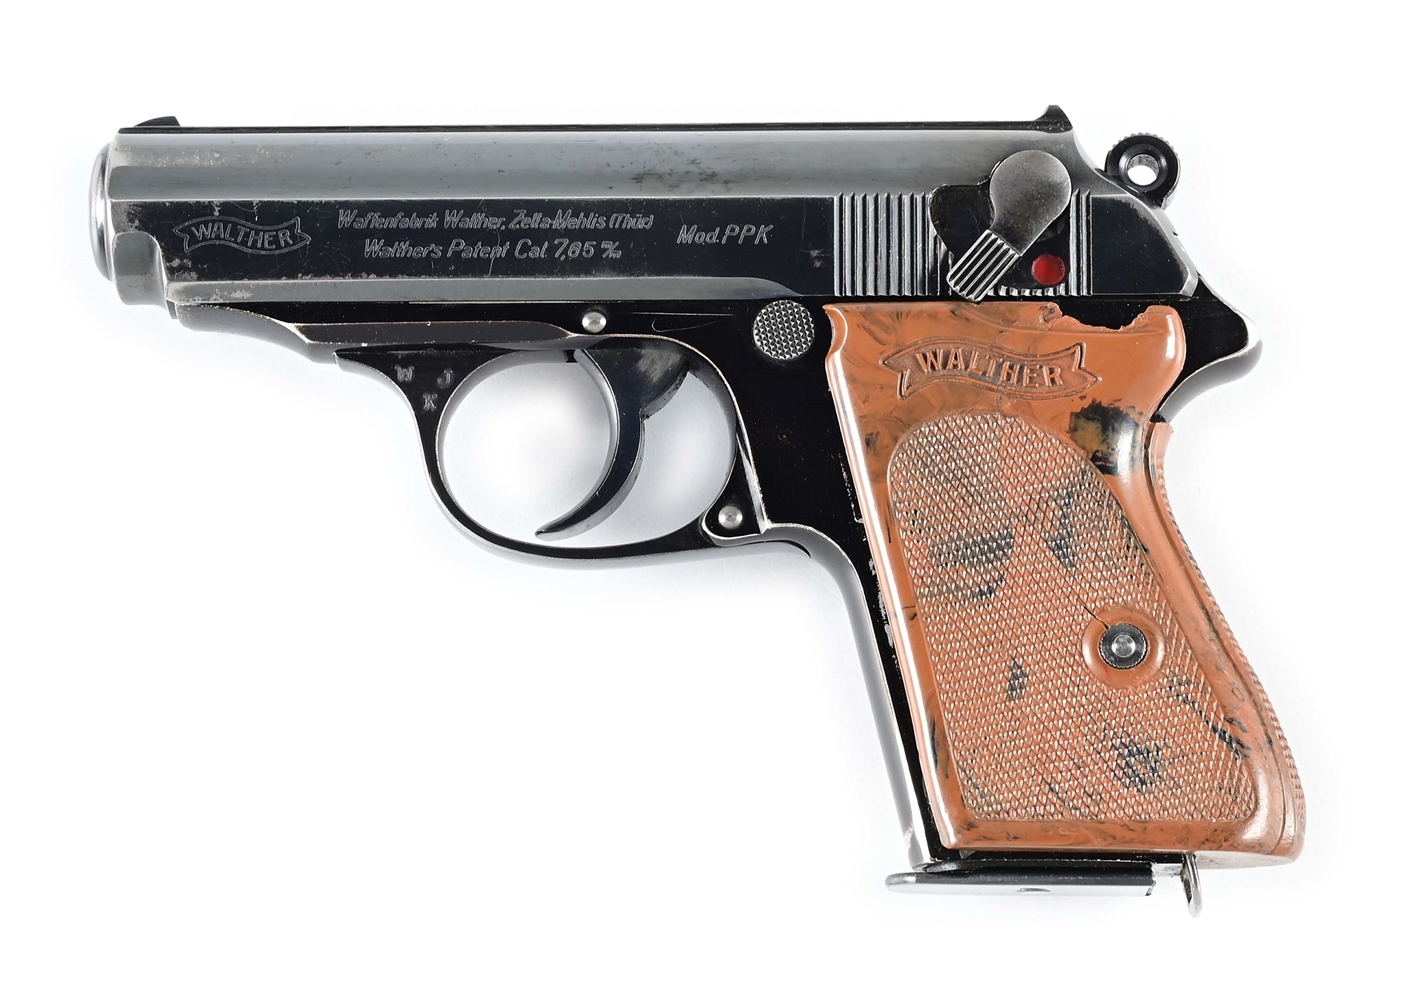 (C) RARE, EARLY PRODUCTION, WALTHER DURAL FRAME PPK SEMI-AUTOMATIC PISTOL.